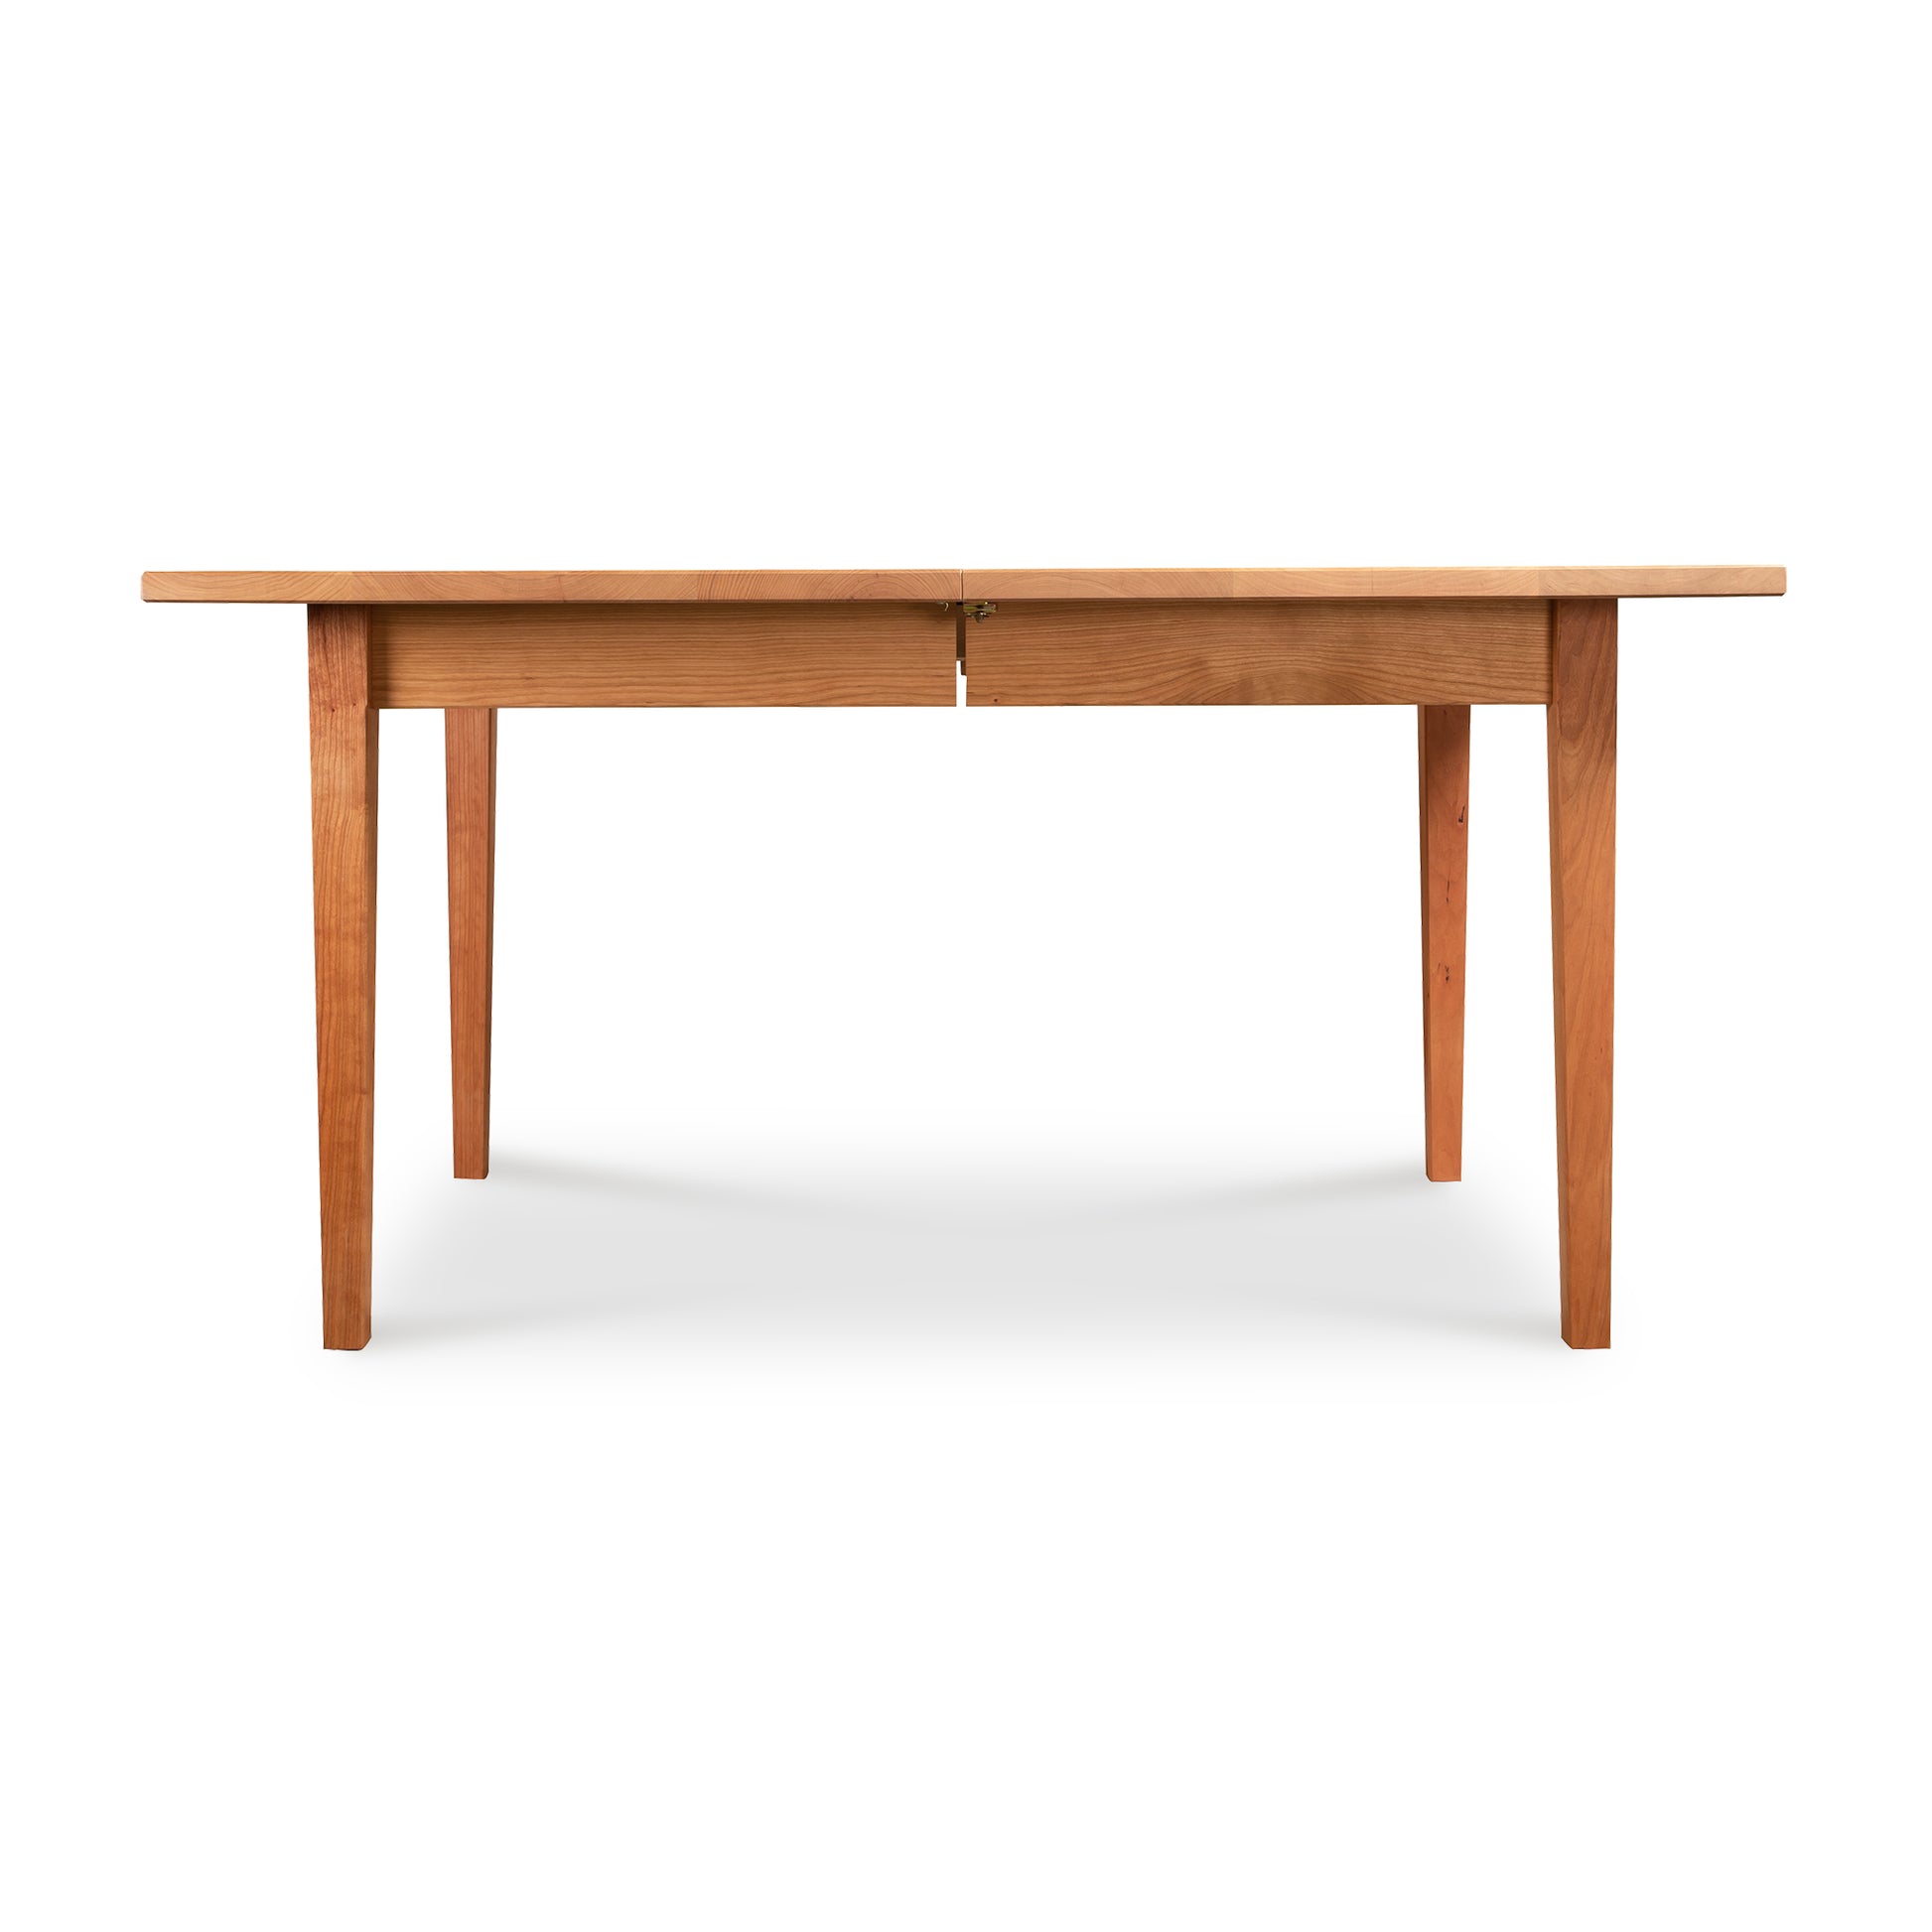 A Maple Corner Woodworks Vermont Shaker Rectangular Extension Dining Table - Clearance against a white background.